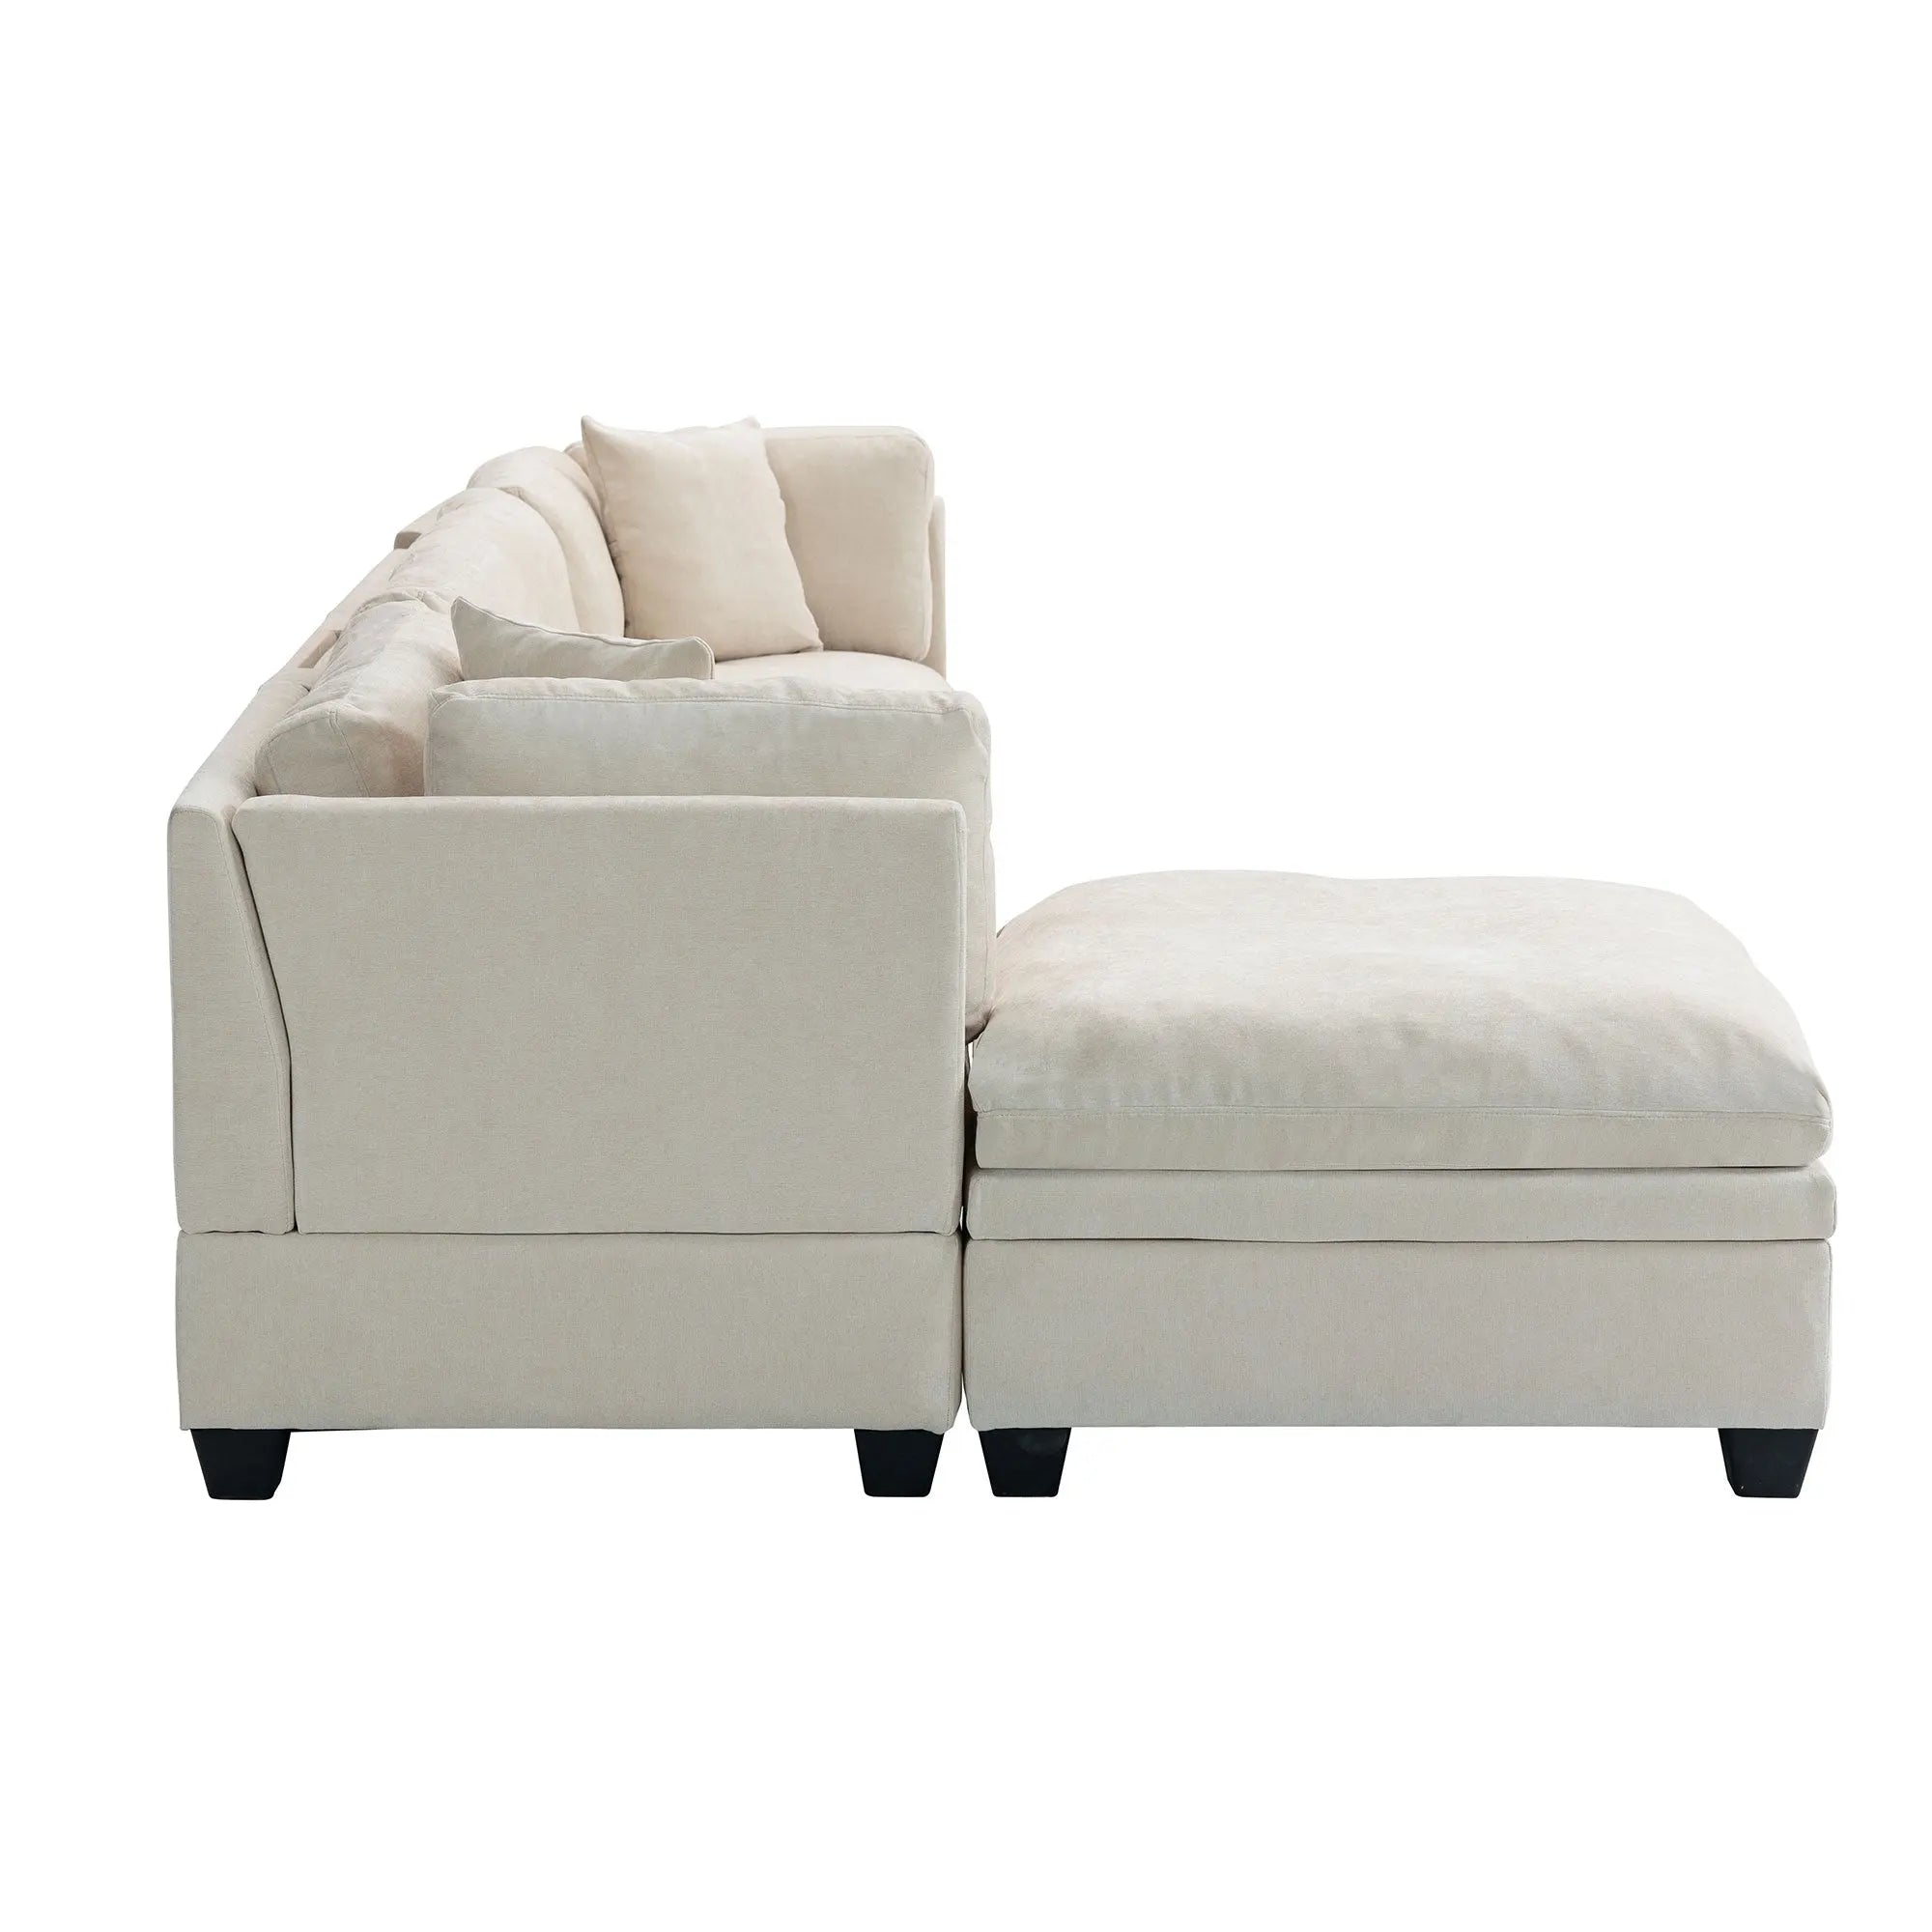 Bellemave 128.7" Upholstered Modular Sofa with Removable Storage Ottoman and 2 hidden cup holders Bellemave